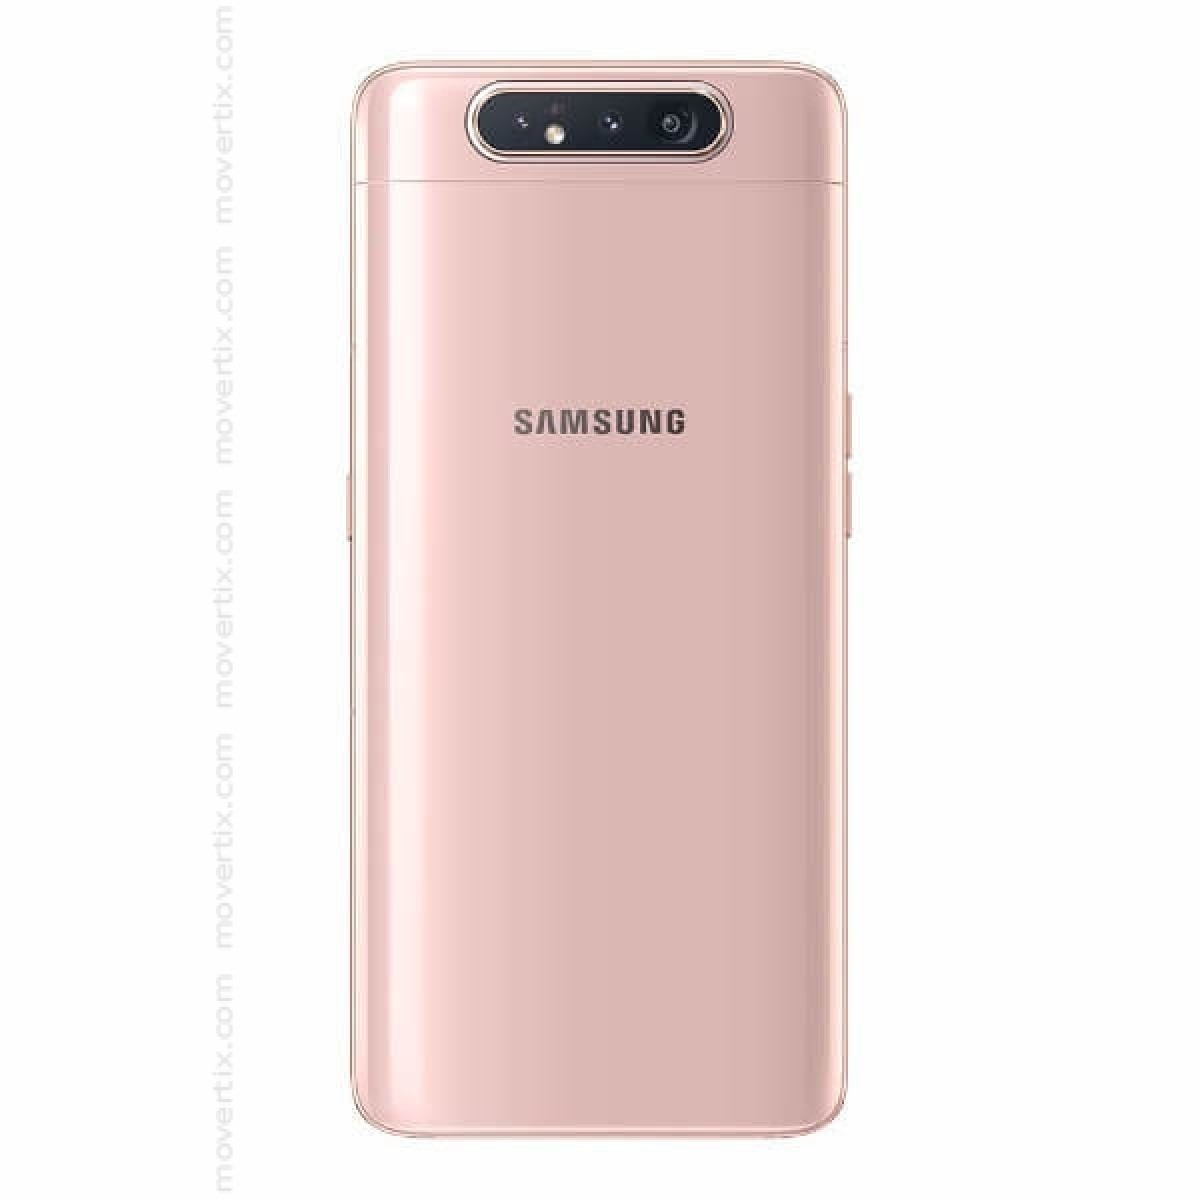 Samsung Galaxy A80 Dual Sim Gold 128gb And 8gb Ram Sm A805f Ds 8801643968212 Movertix Mobile Phones Shop